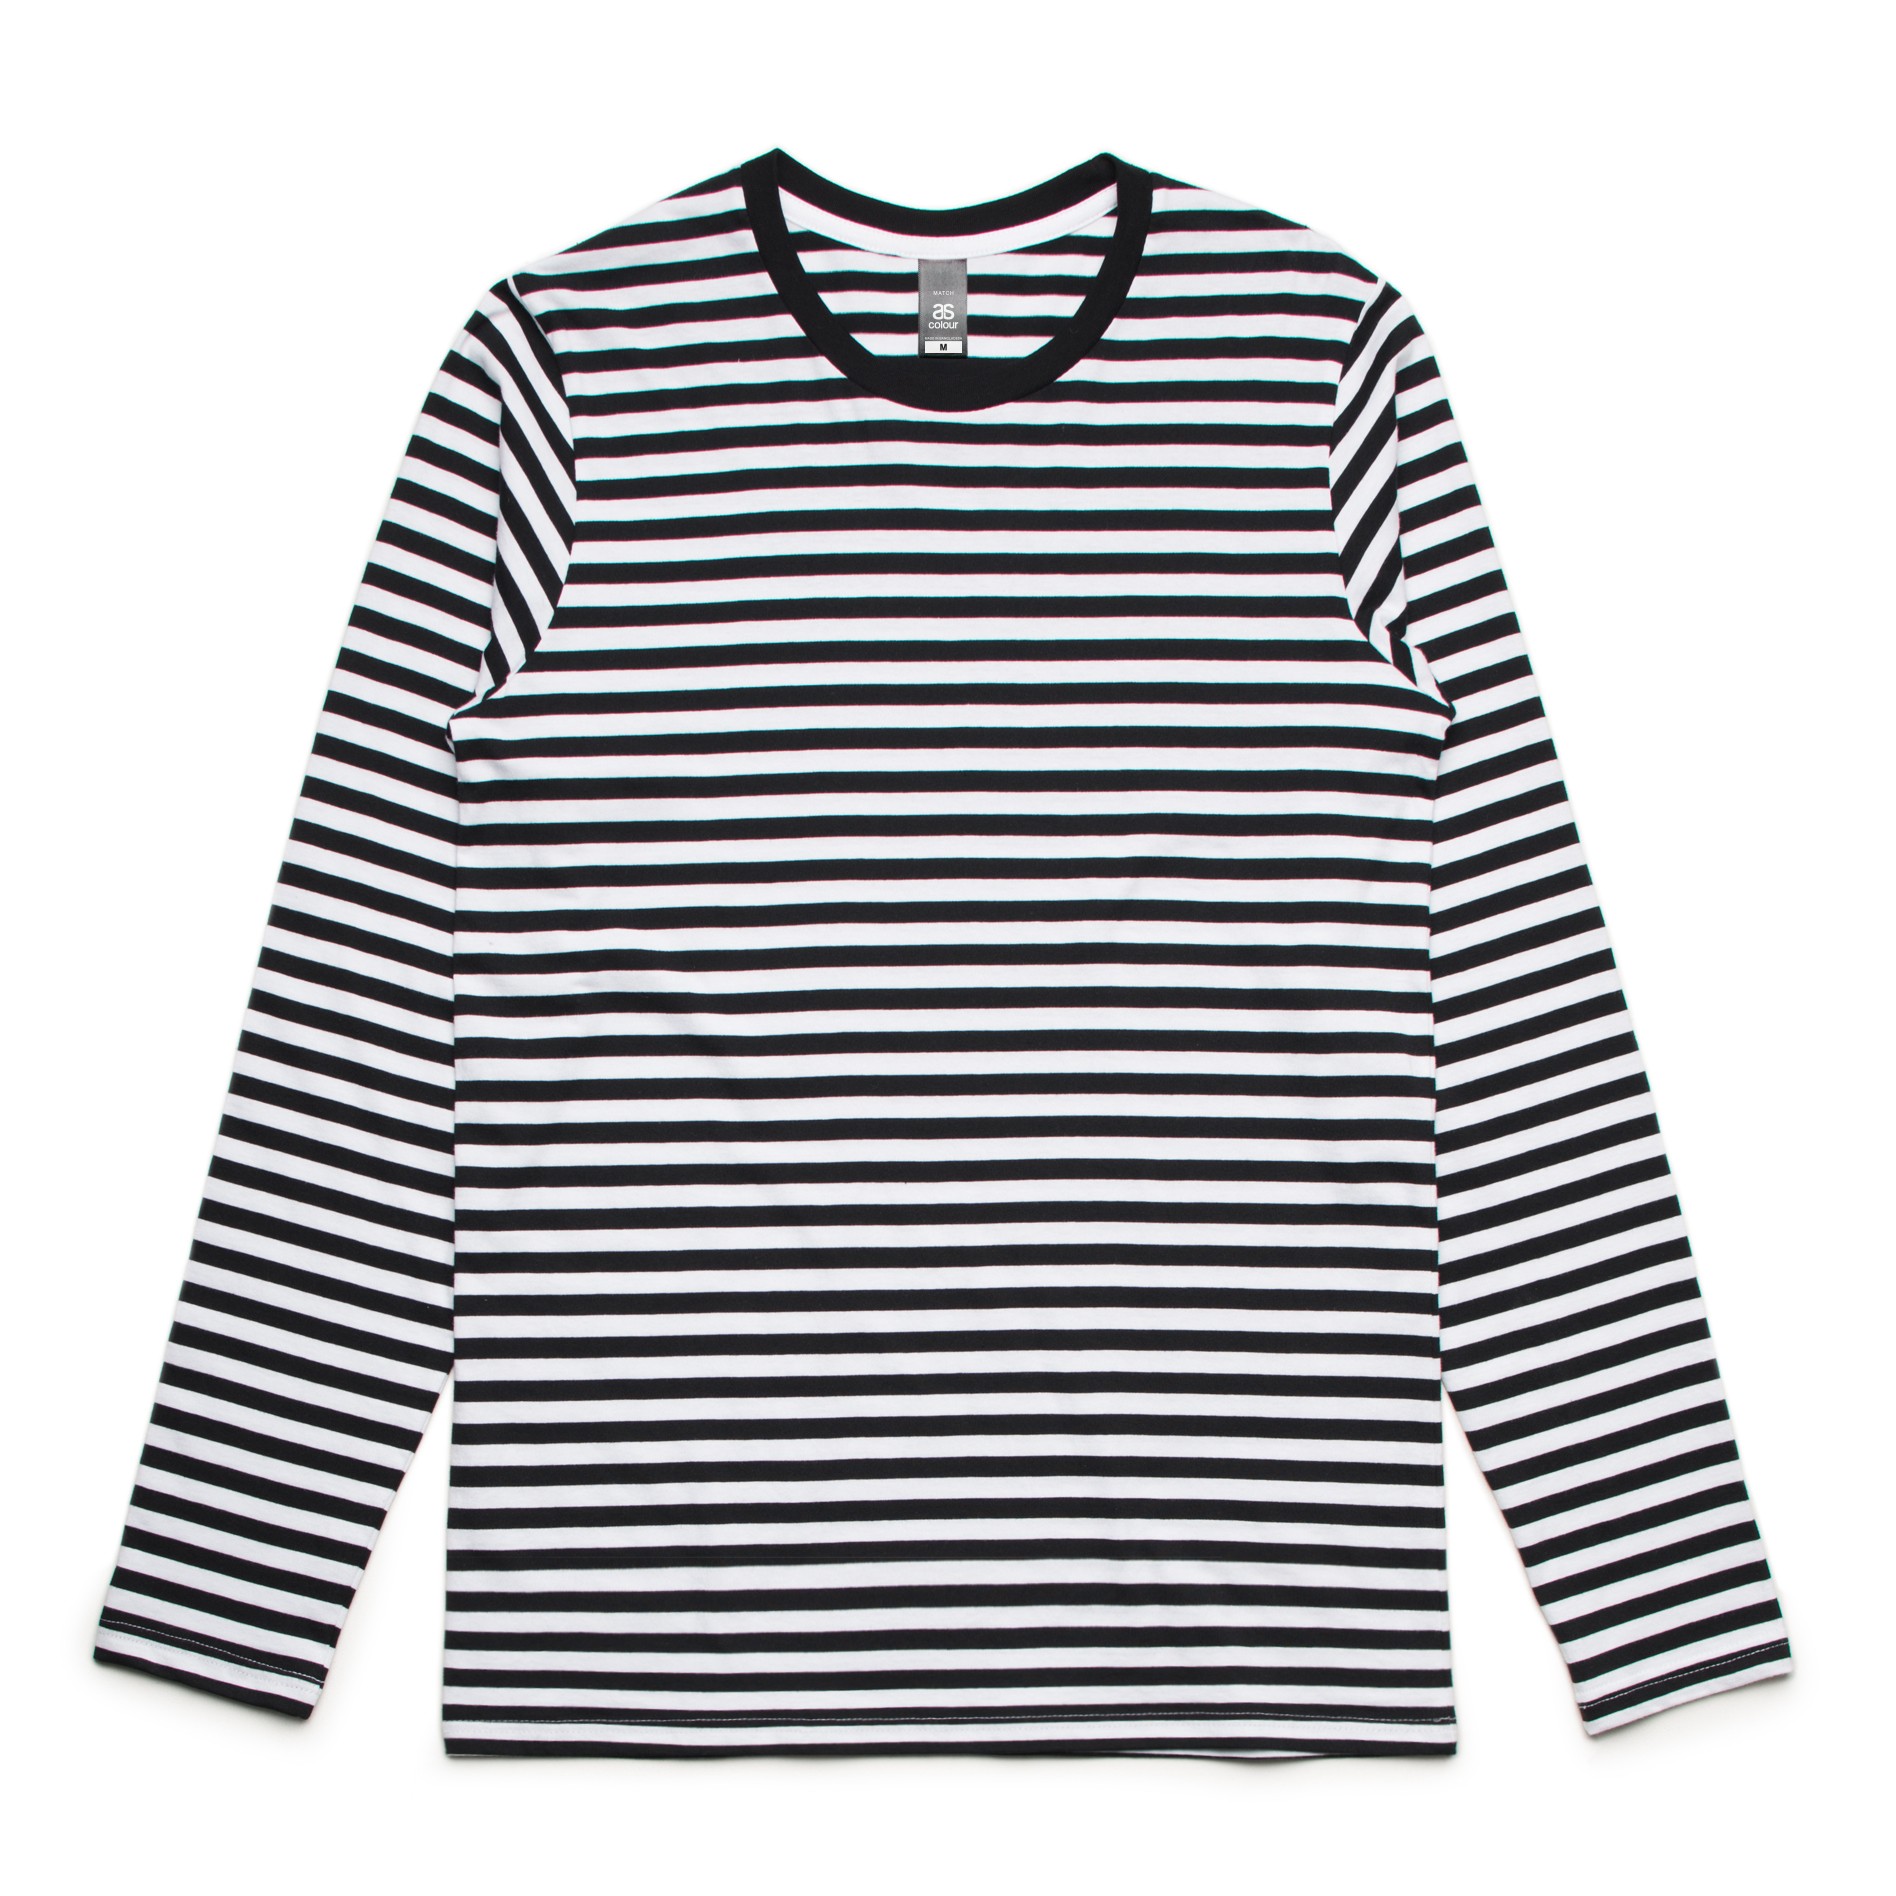 5031_match_stripe_long_sleeve_tee_black_white – Aprons Direct – Branded ...